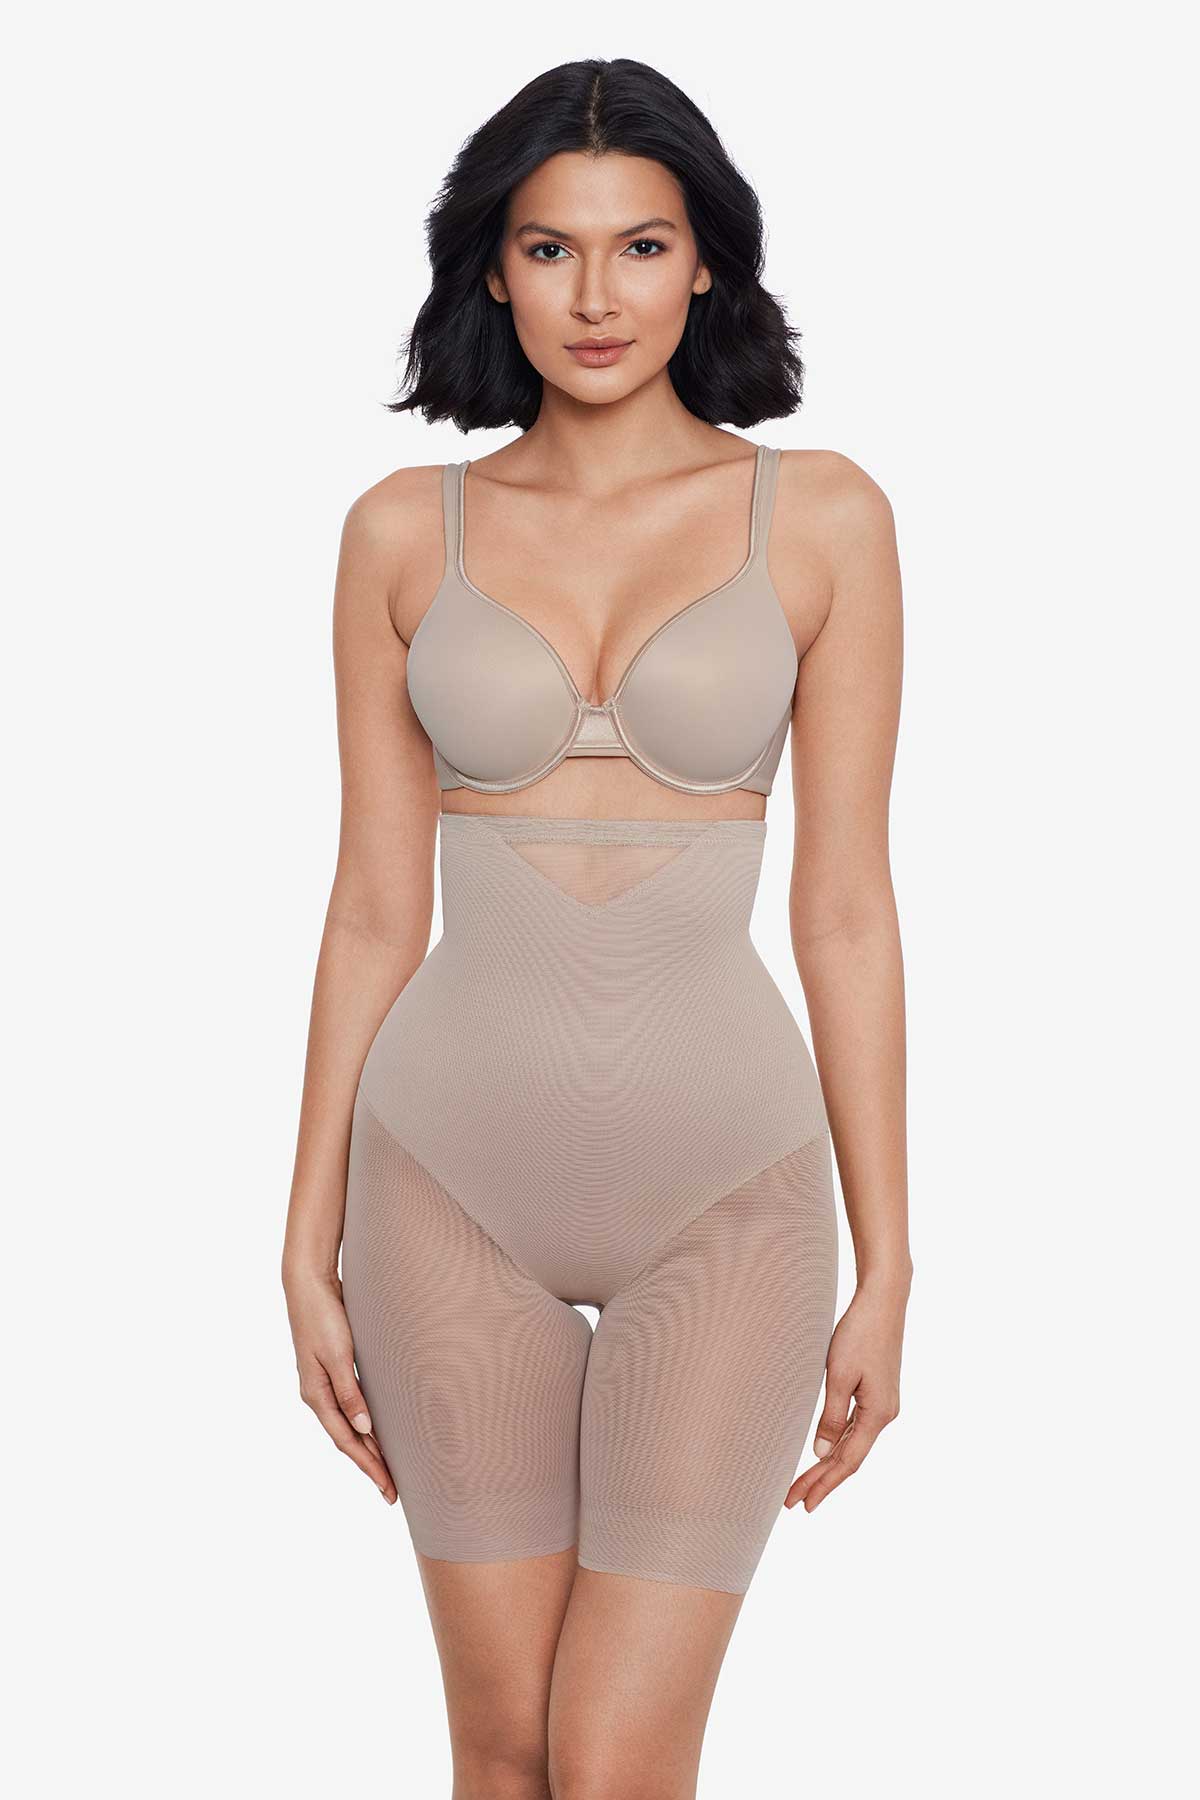 Extra Firm Sexy Sheer Shaping Hi-Waist Thigh Slimmer